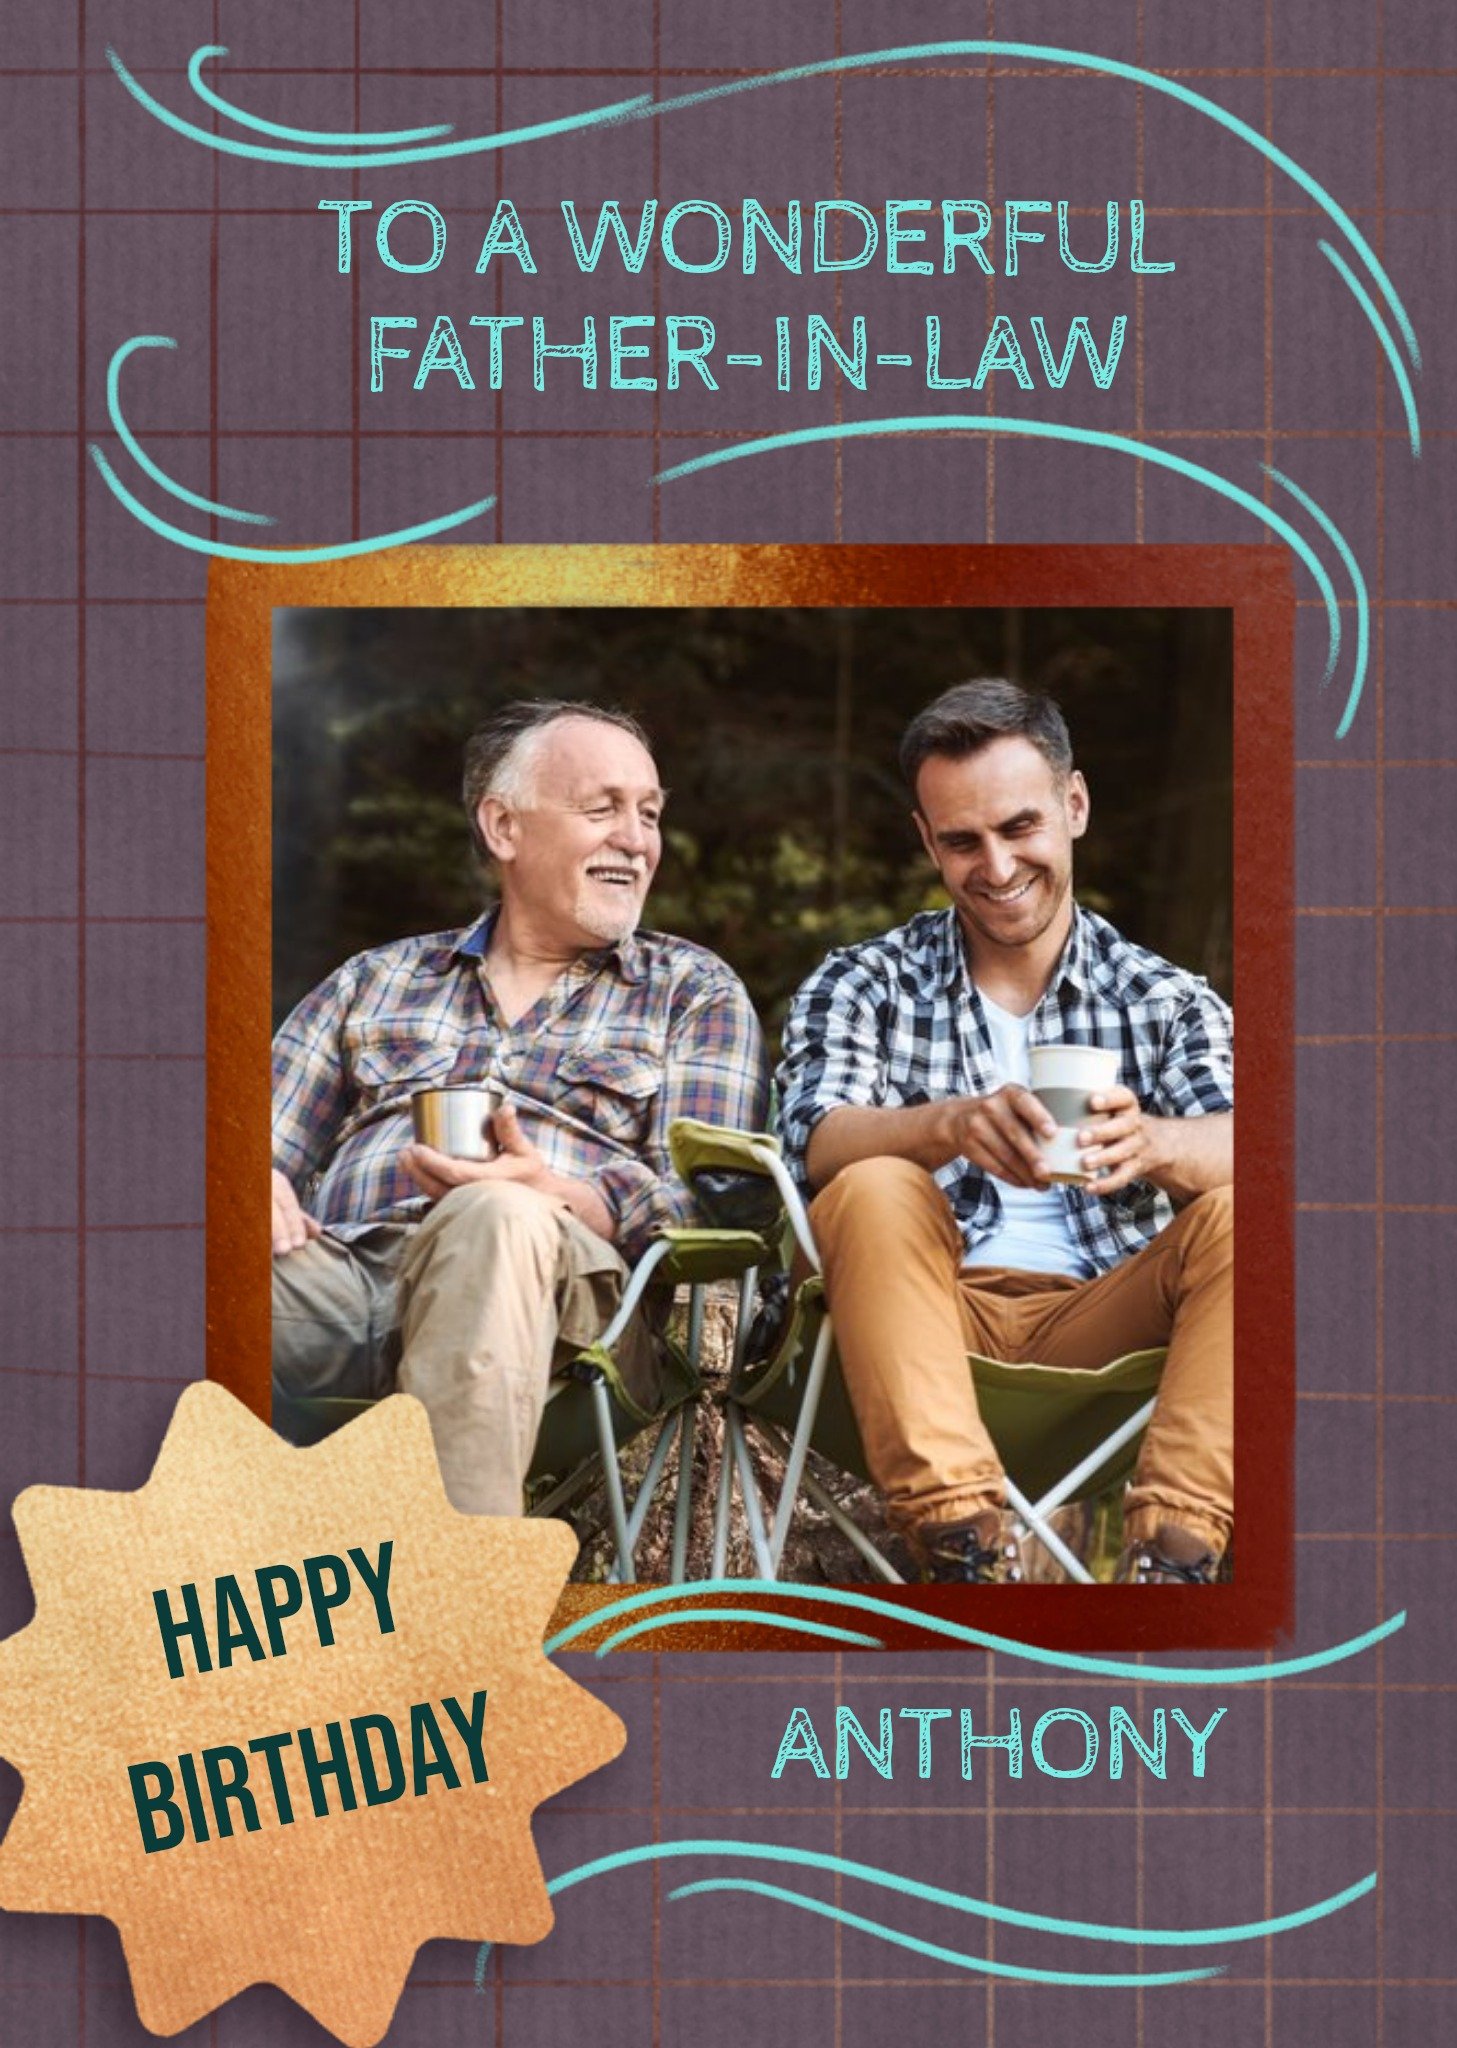 Moonpig To A Wonderful Father In Law Photo Upload Birthday Card, Large